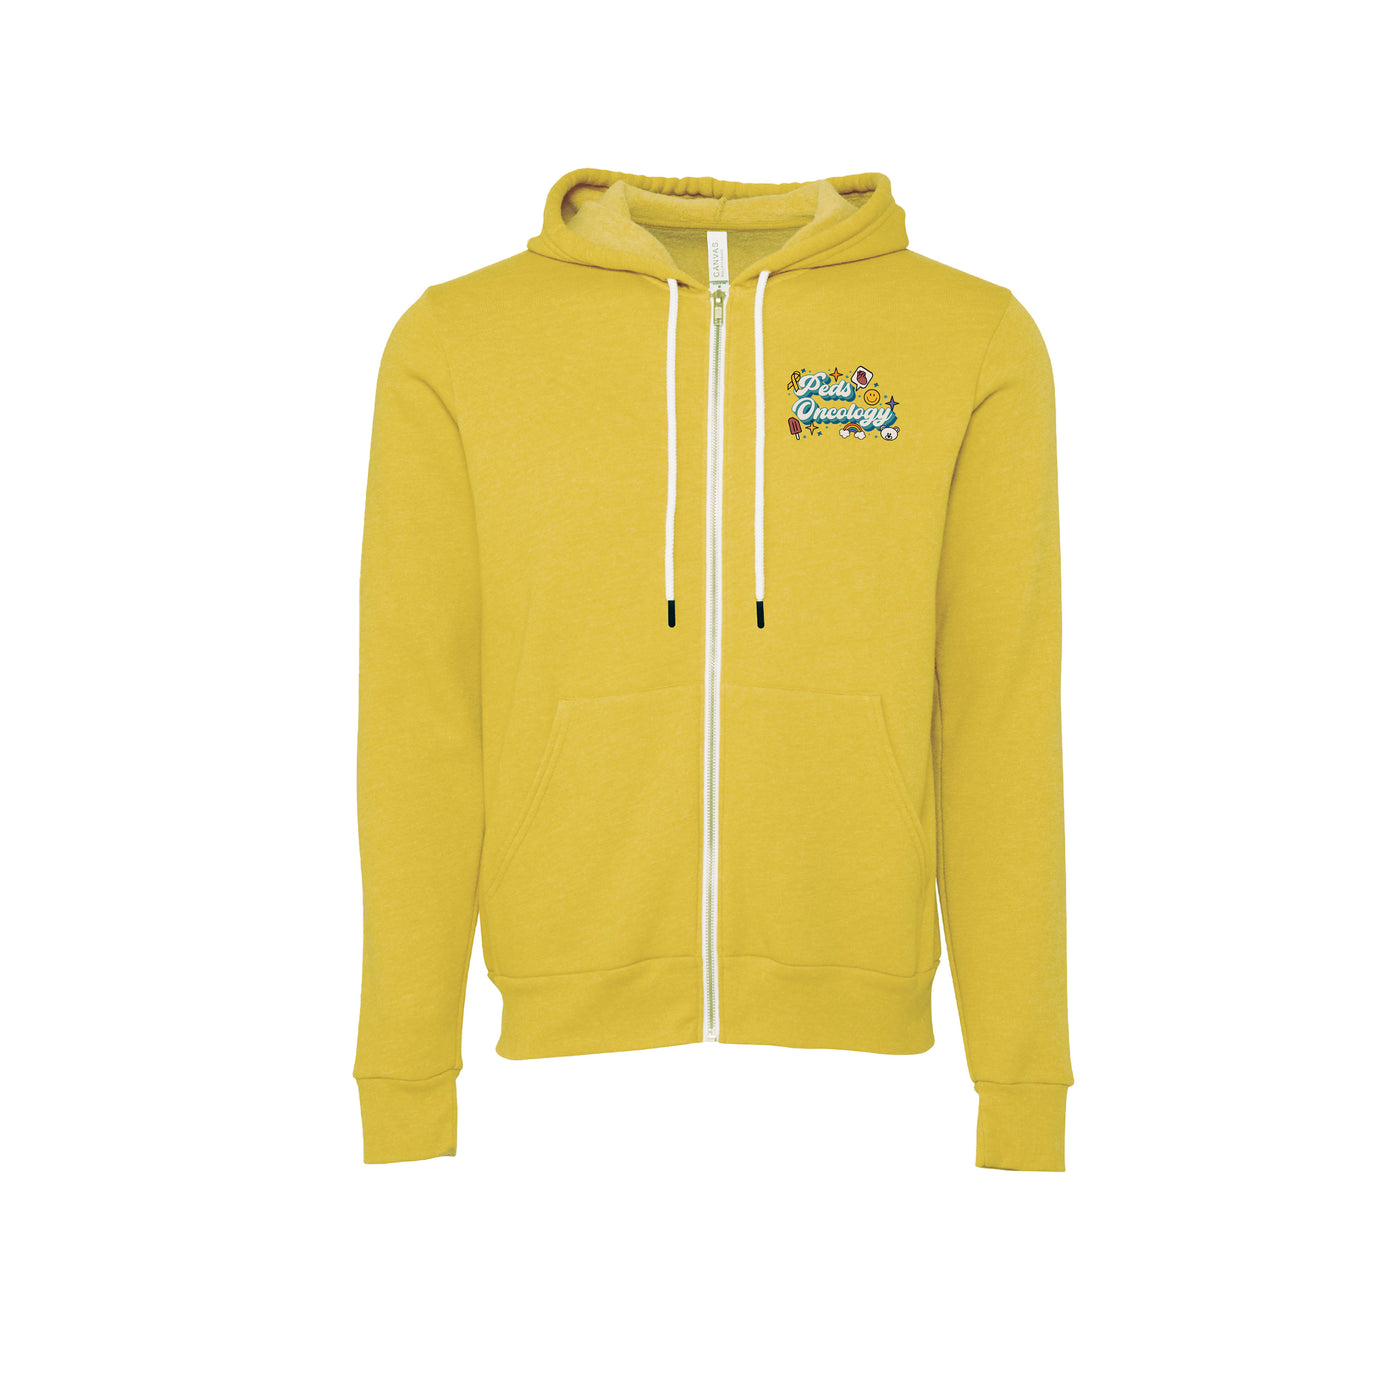 Peds Oncology Retro - Basic Hoodie